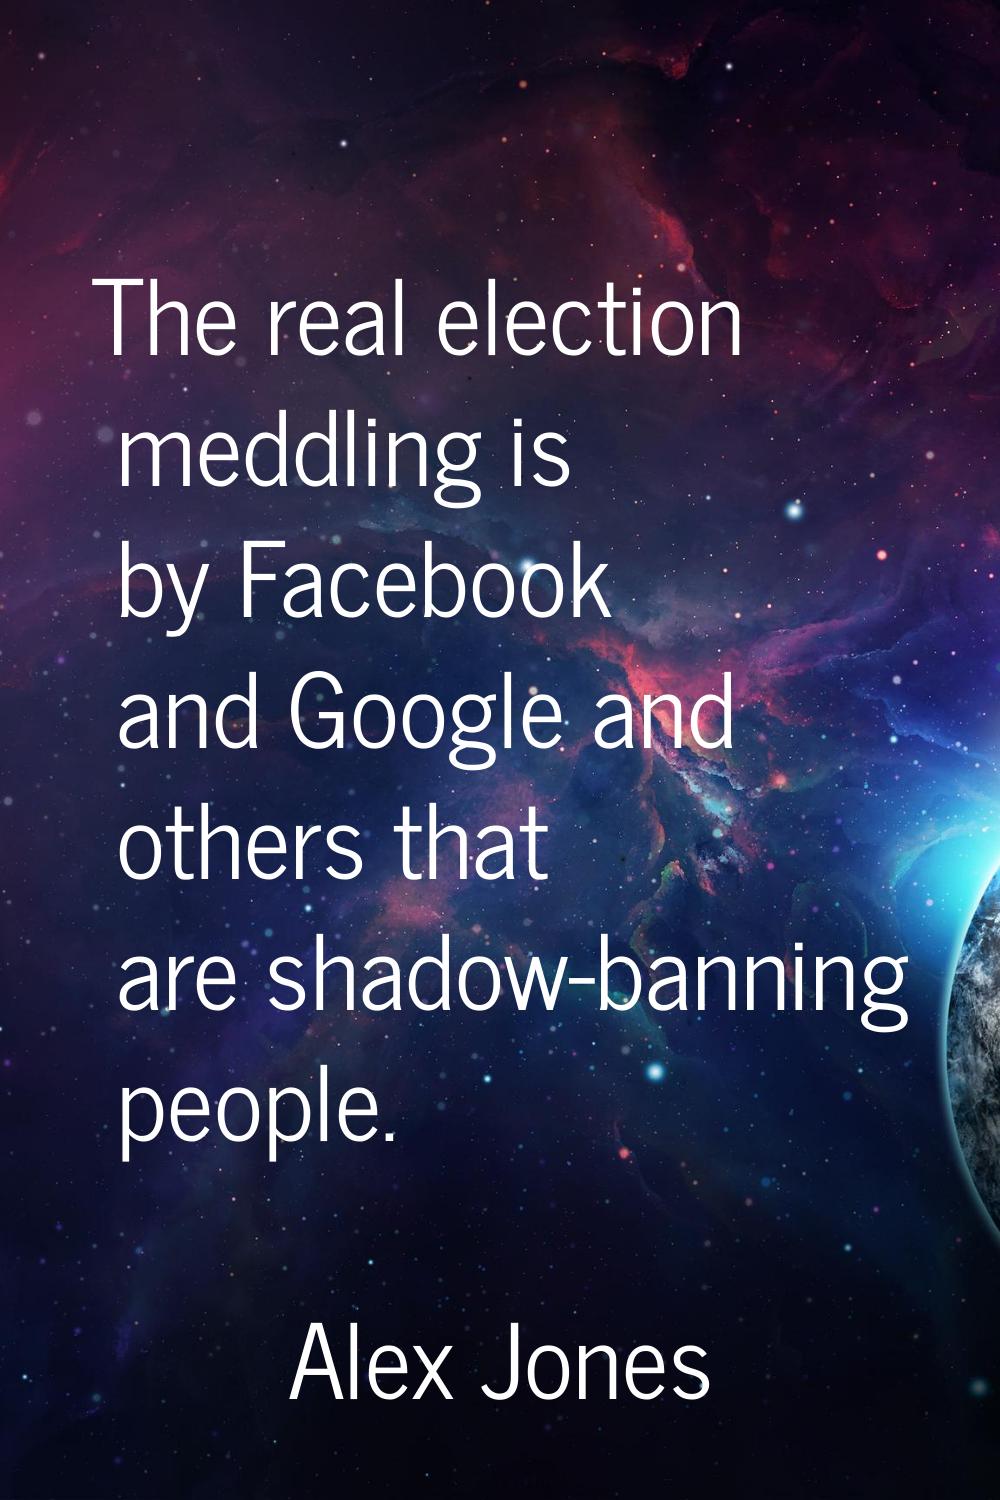 The real election meddling is by Facebook and Google and others that are shadow-banning people.